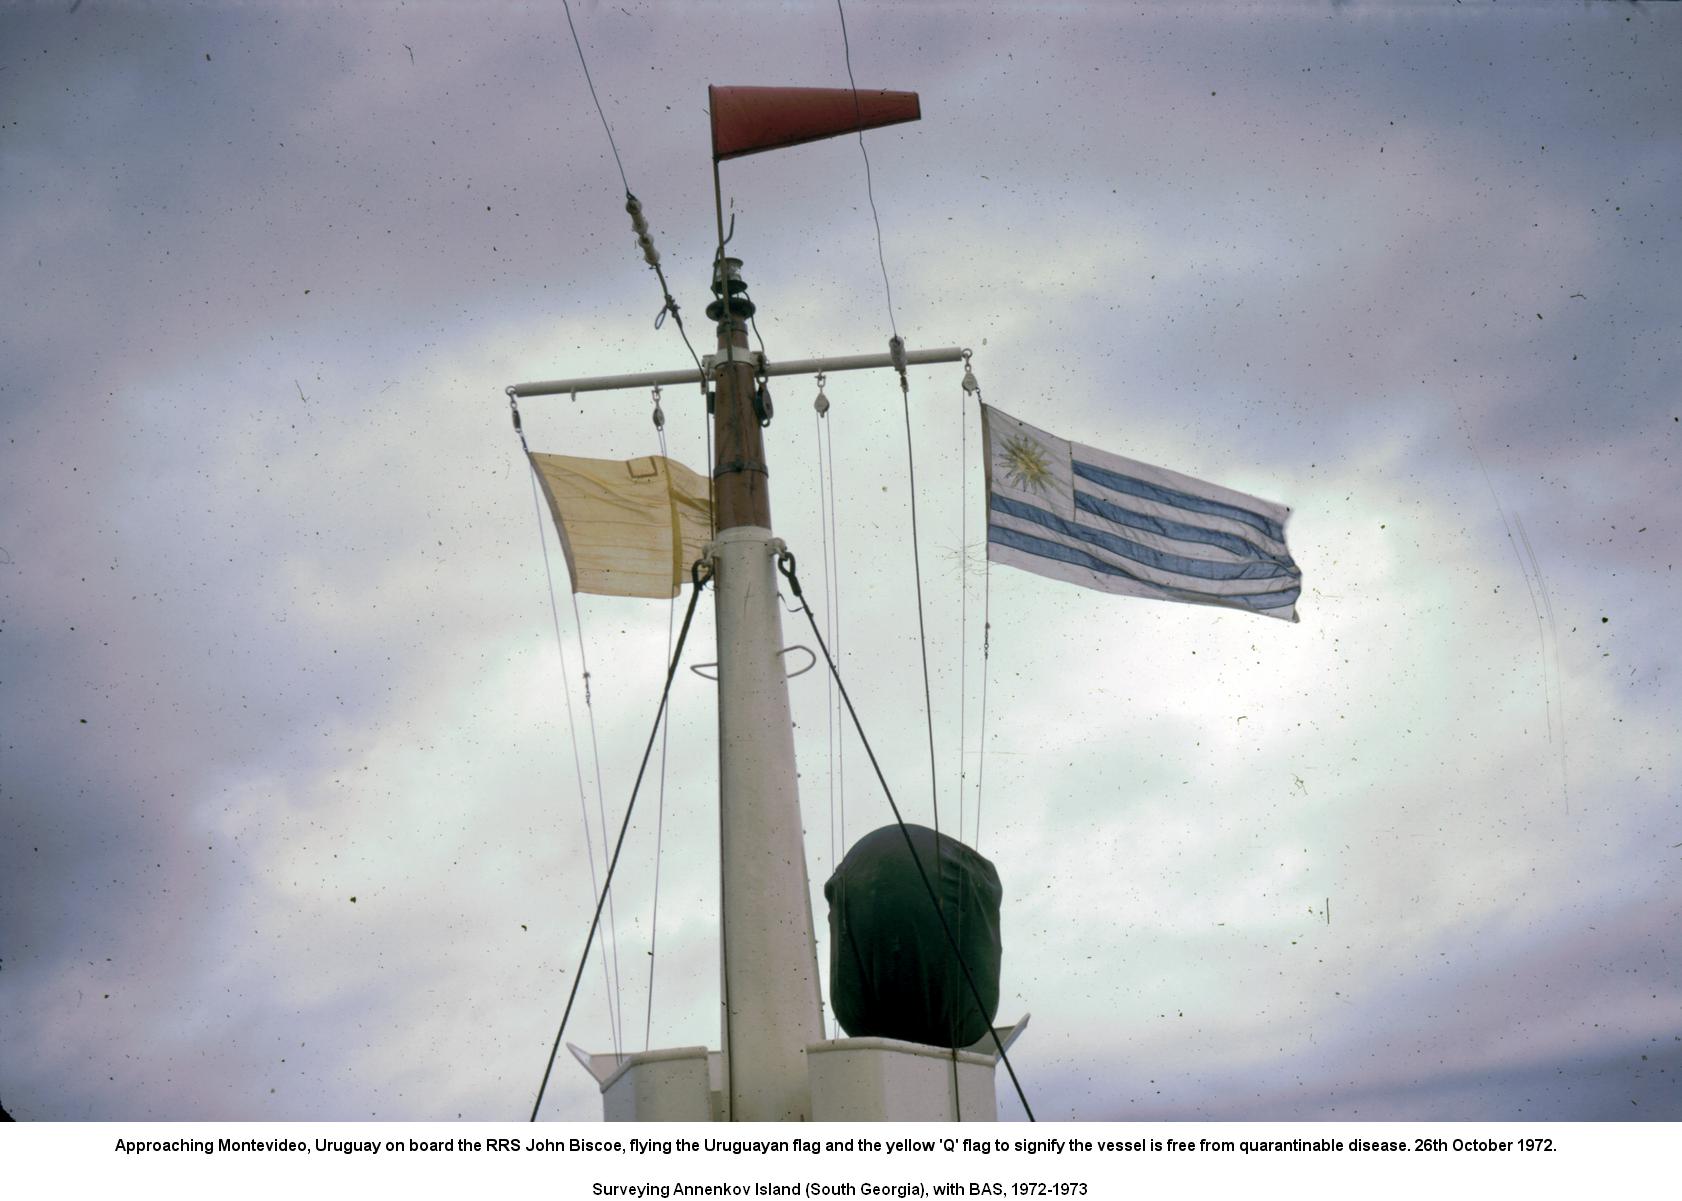 Approaching Montevideo on board the RRS John Biscoe, flying the Uruguayan flag and the yellow 'Q' flag, 26th October 1972.